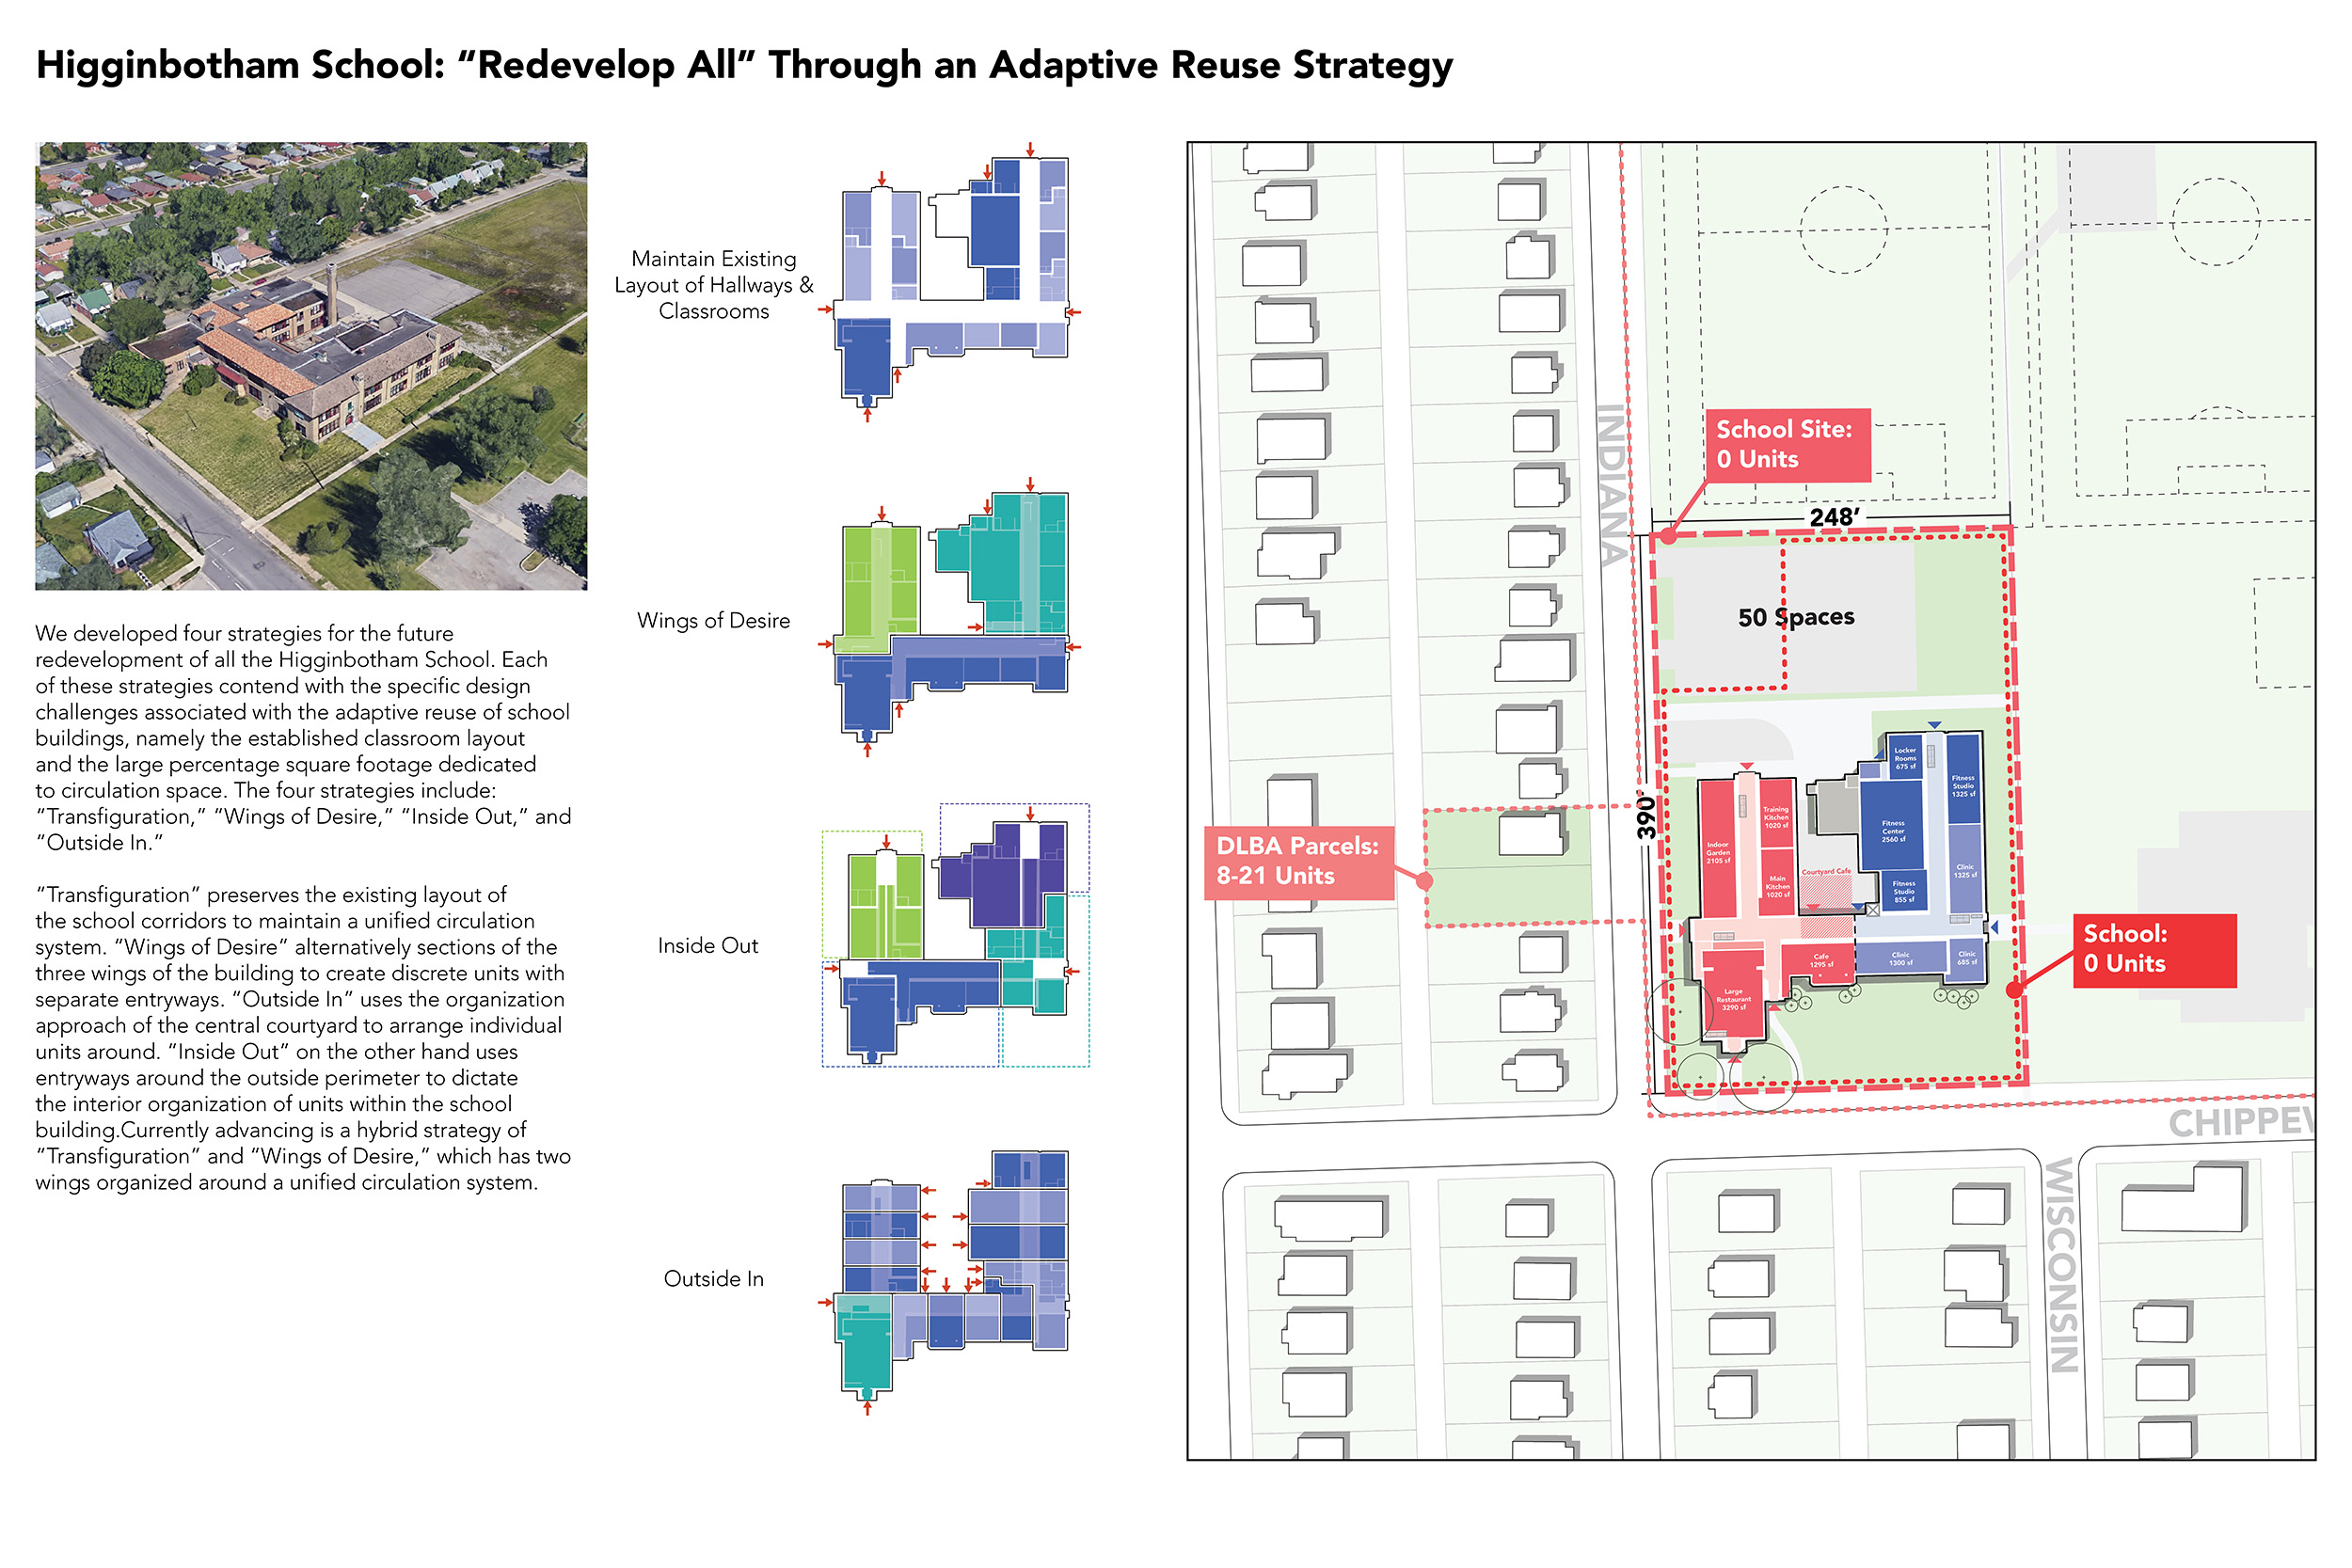 A diagram mapping the adaptive reuse strategy of Higginbottom School in Detroit, MI.